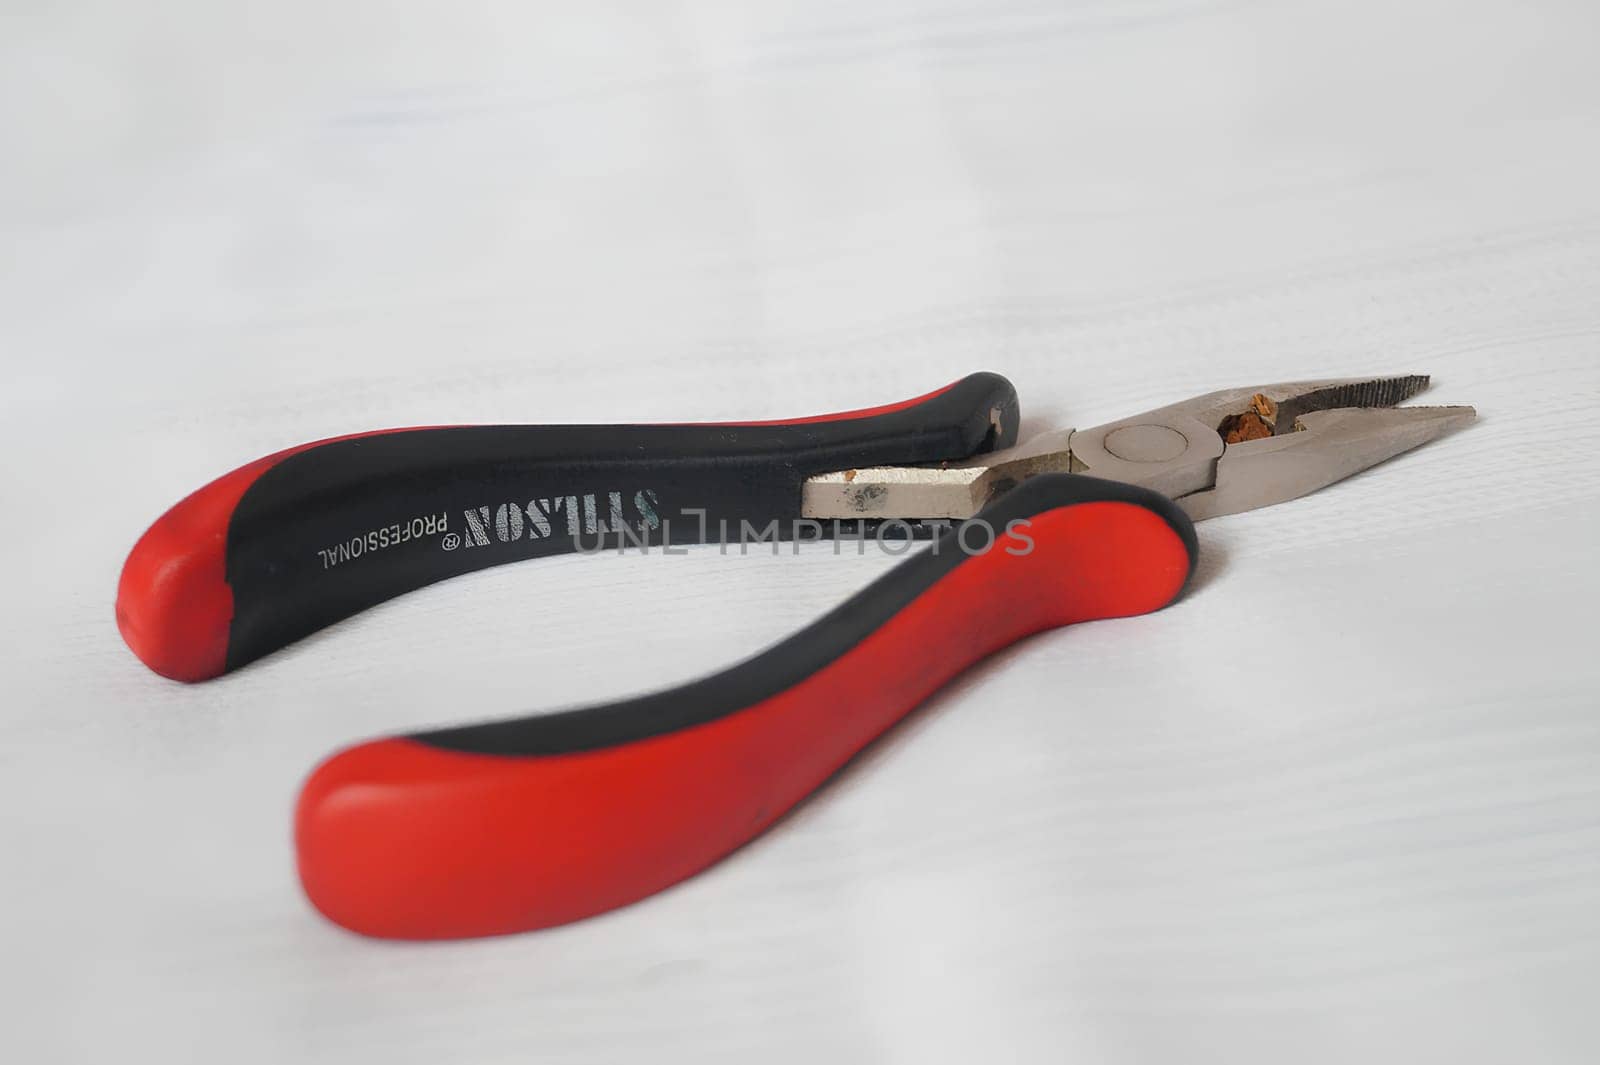 A pair of plier on the handle. High quality photo